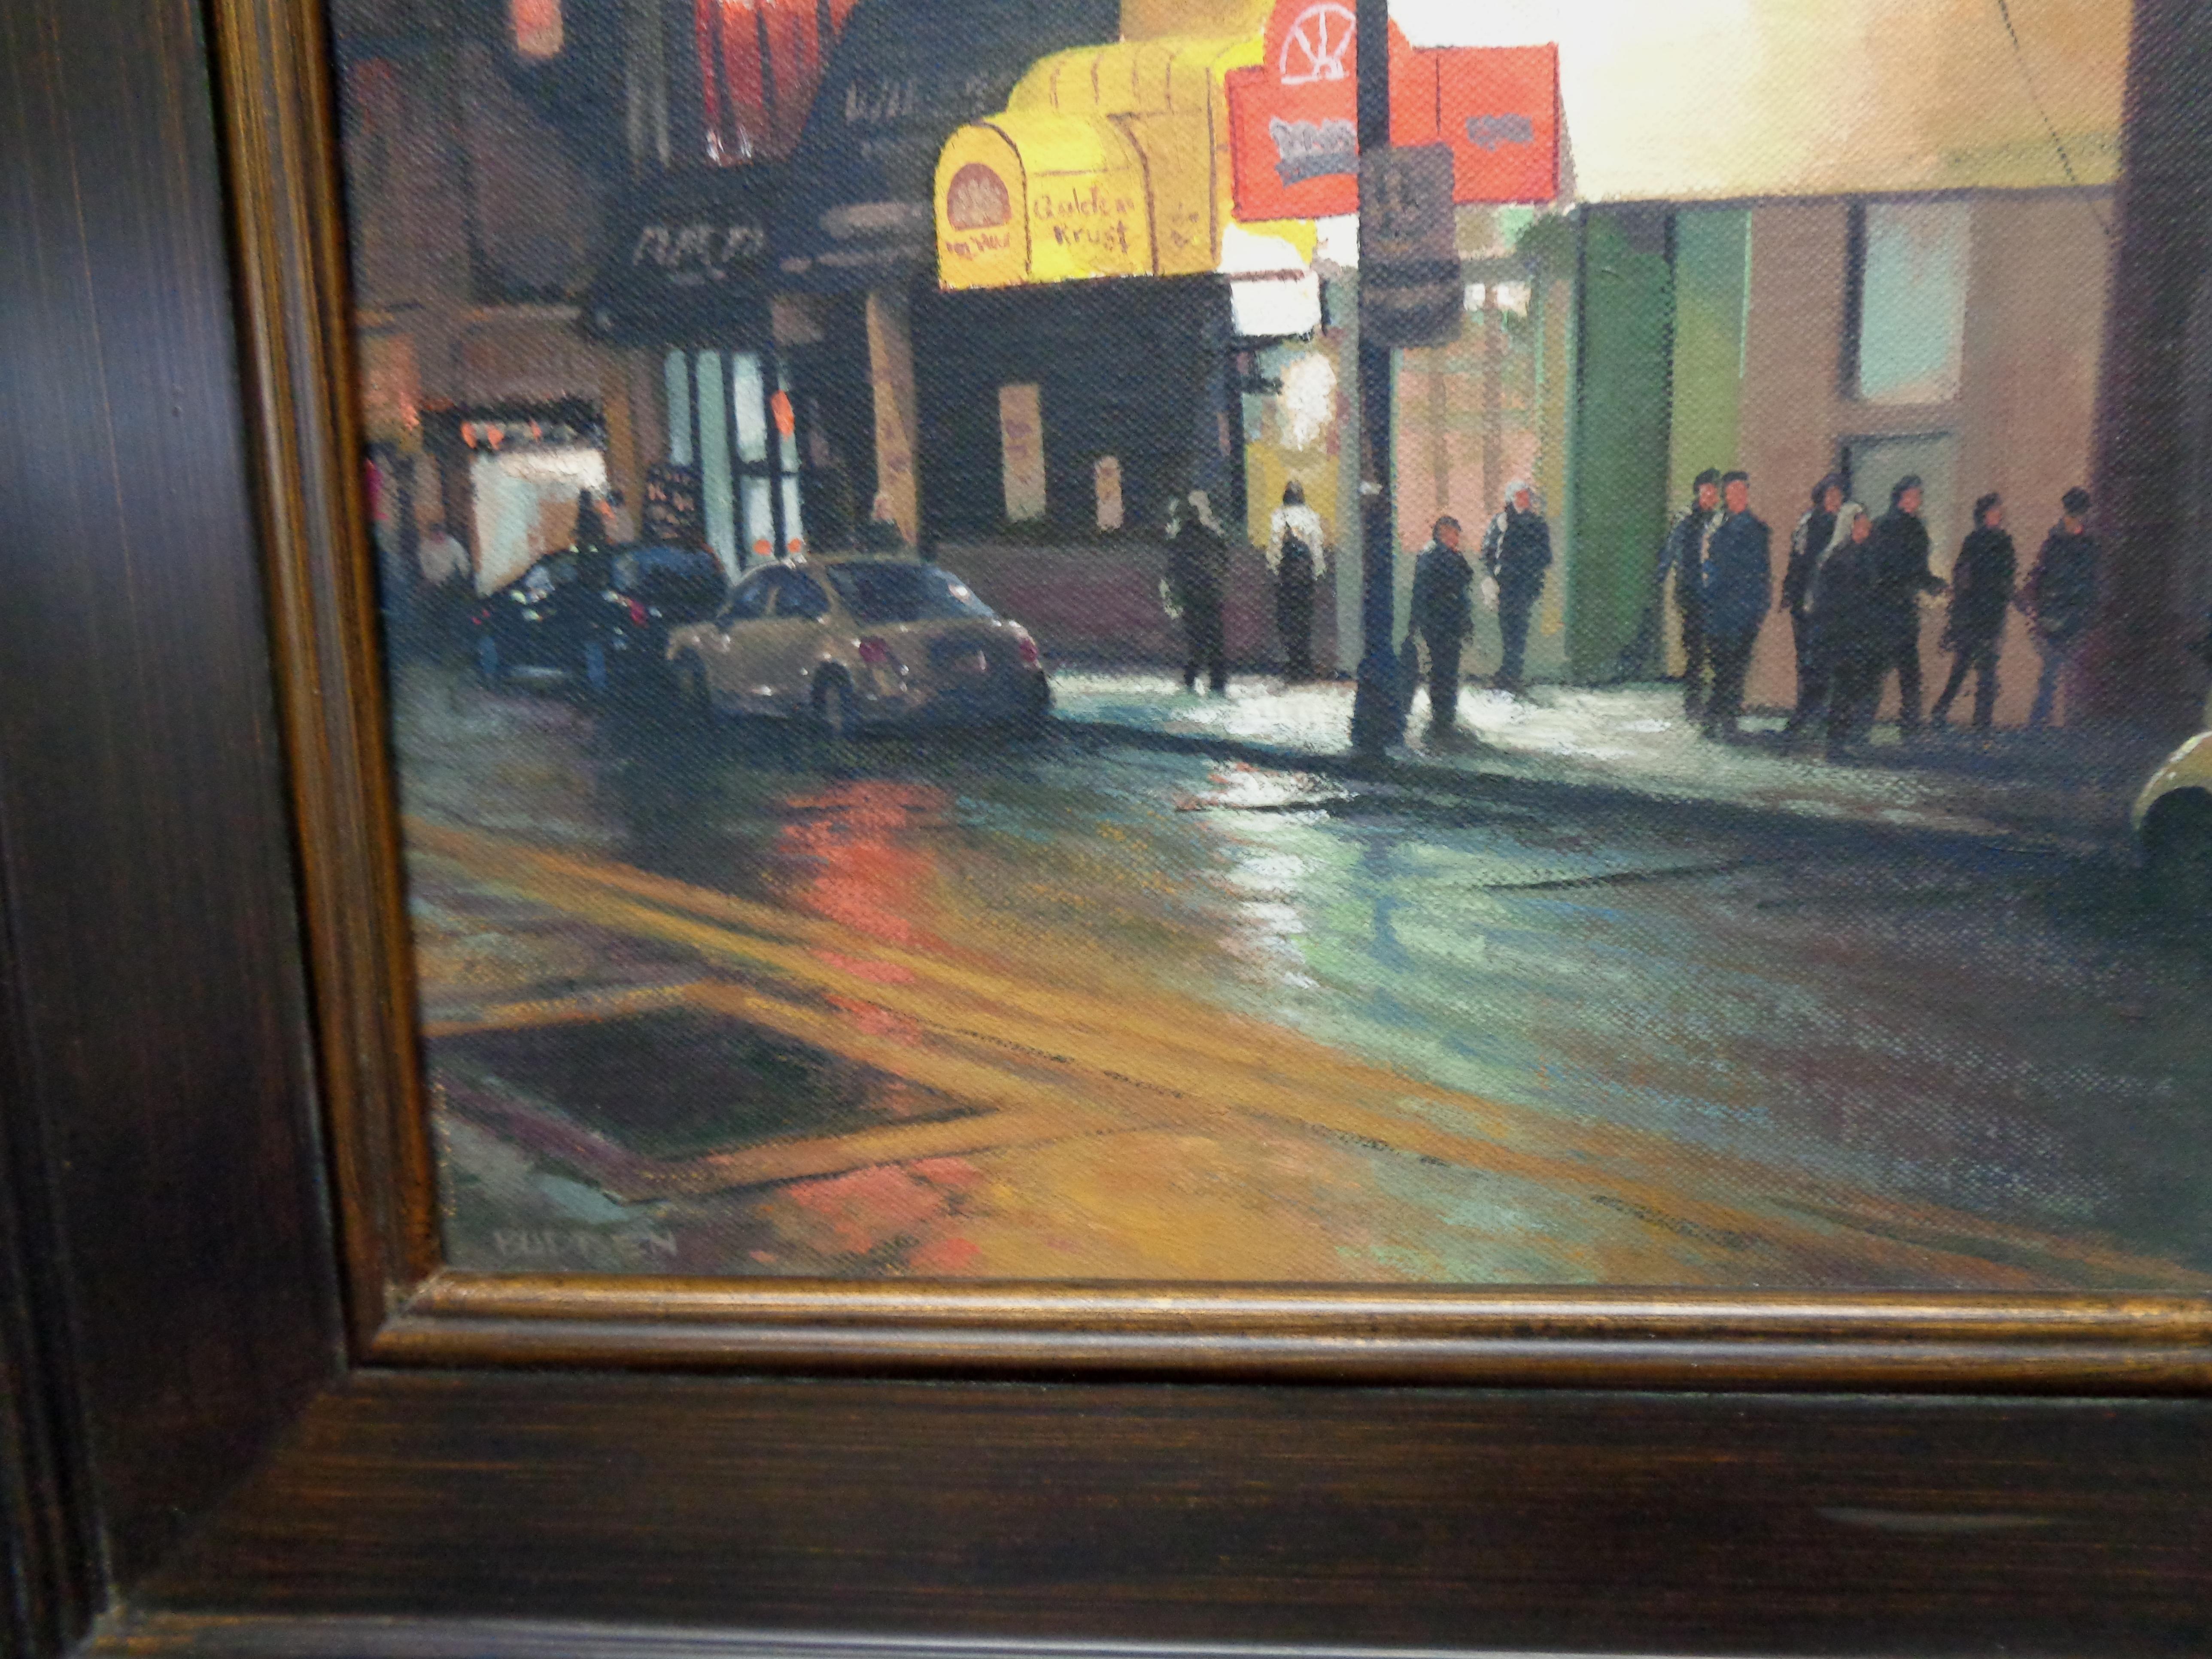   NYC Oil Painting Michael Budden Nocturne Street Scene 